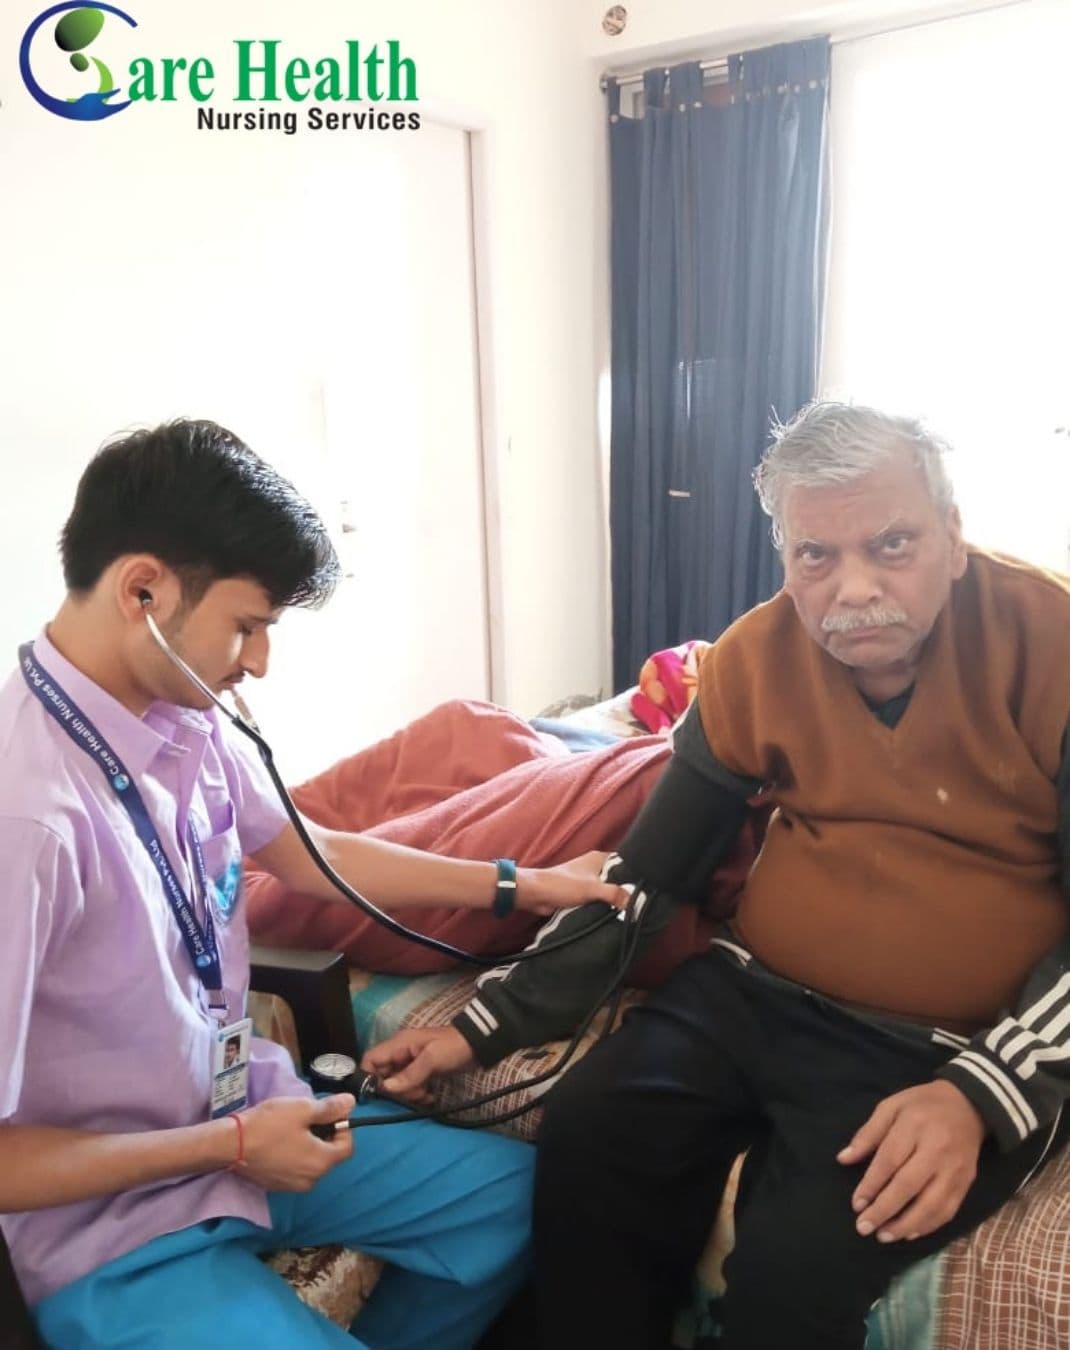 Blood pressure(BP) and suggar patient care attendent at home by care health nurses pvt ltd